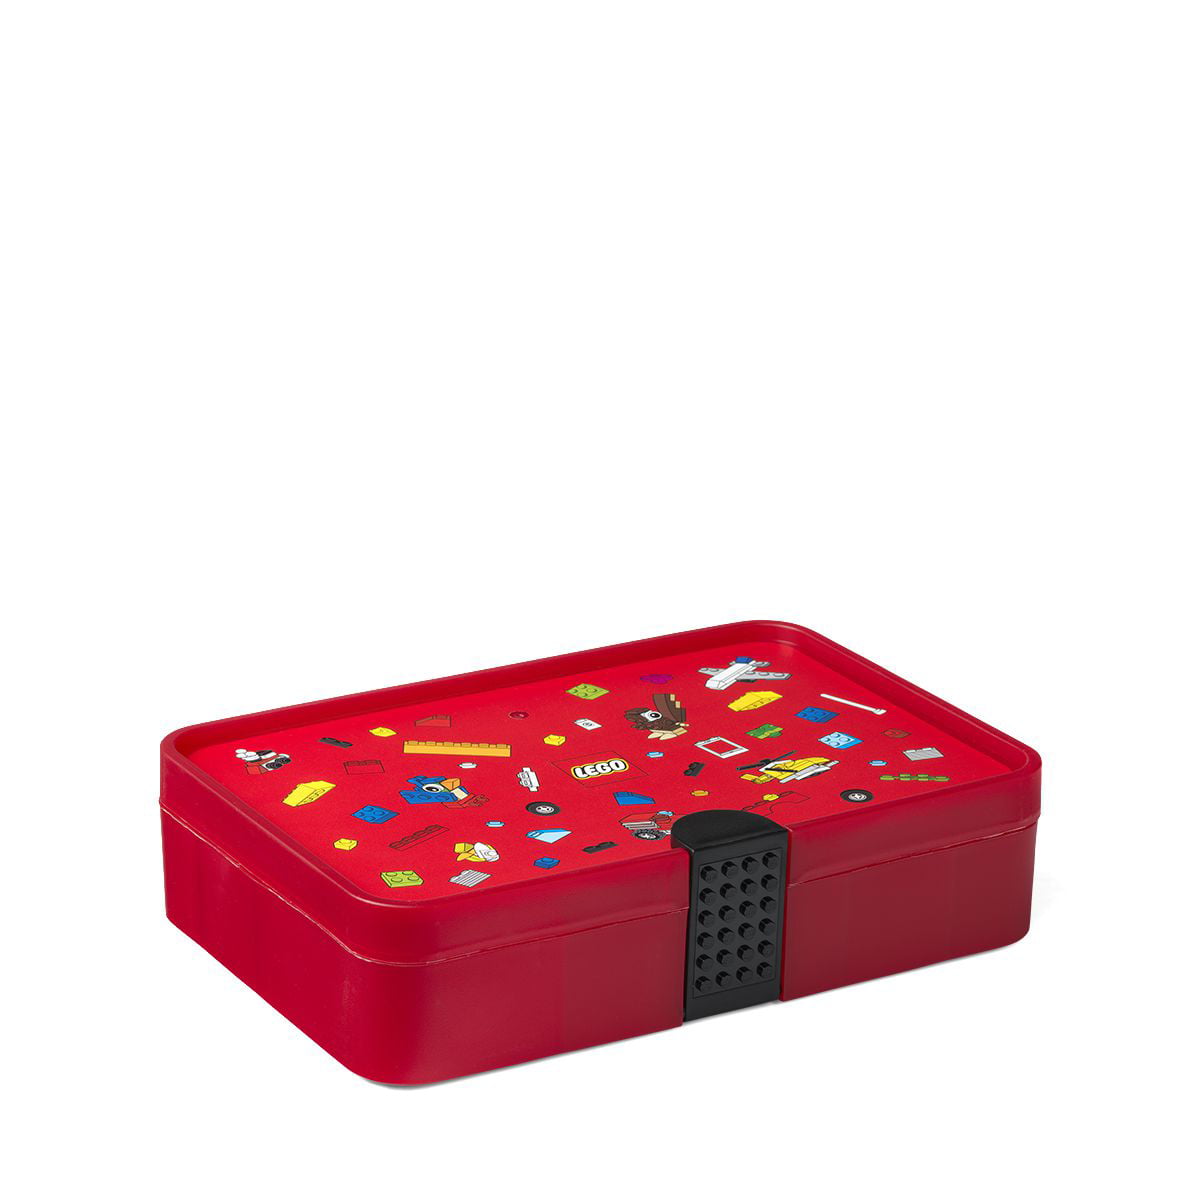 Lego Sorting Box - Red 